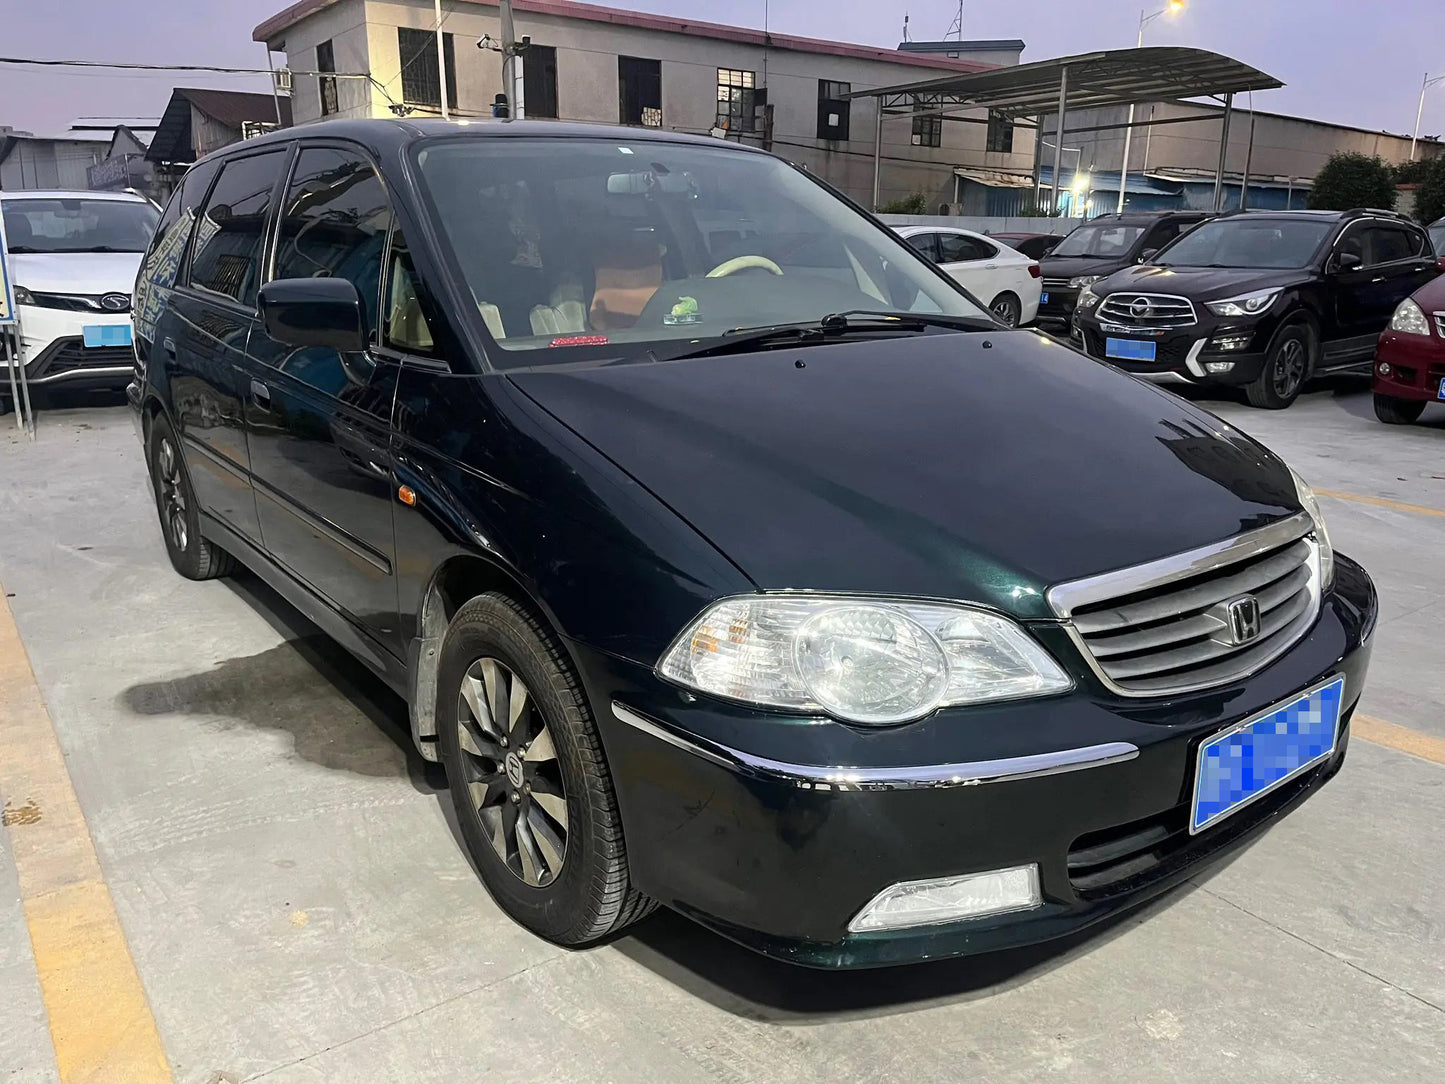 Honda Odyssey 2002 2.3 automated manual refined version 【EXW】